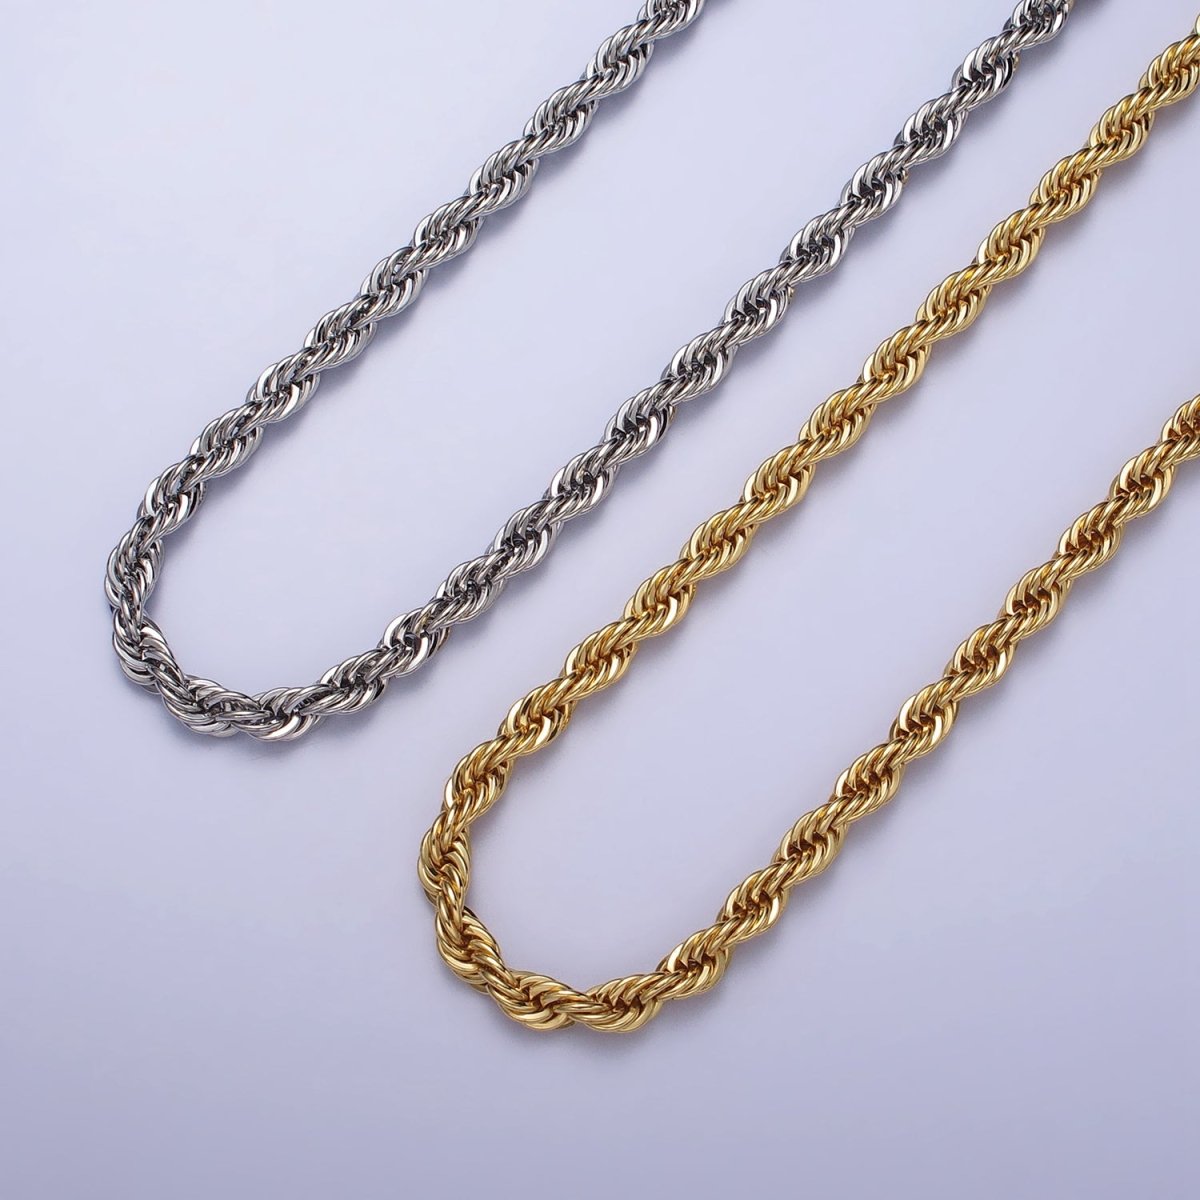 Bold Gold Rope necklace, Thick Chunky chain necklace 5mm Twist Necklace 17", 19.5 inch + 2 inch extender | WA-1532 WA-1533 WA-1534 WA-1535 Clearance Pricing - DLUXCA